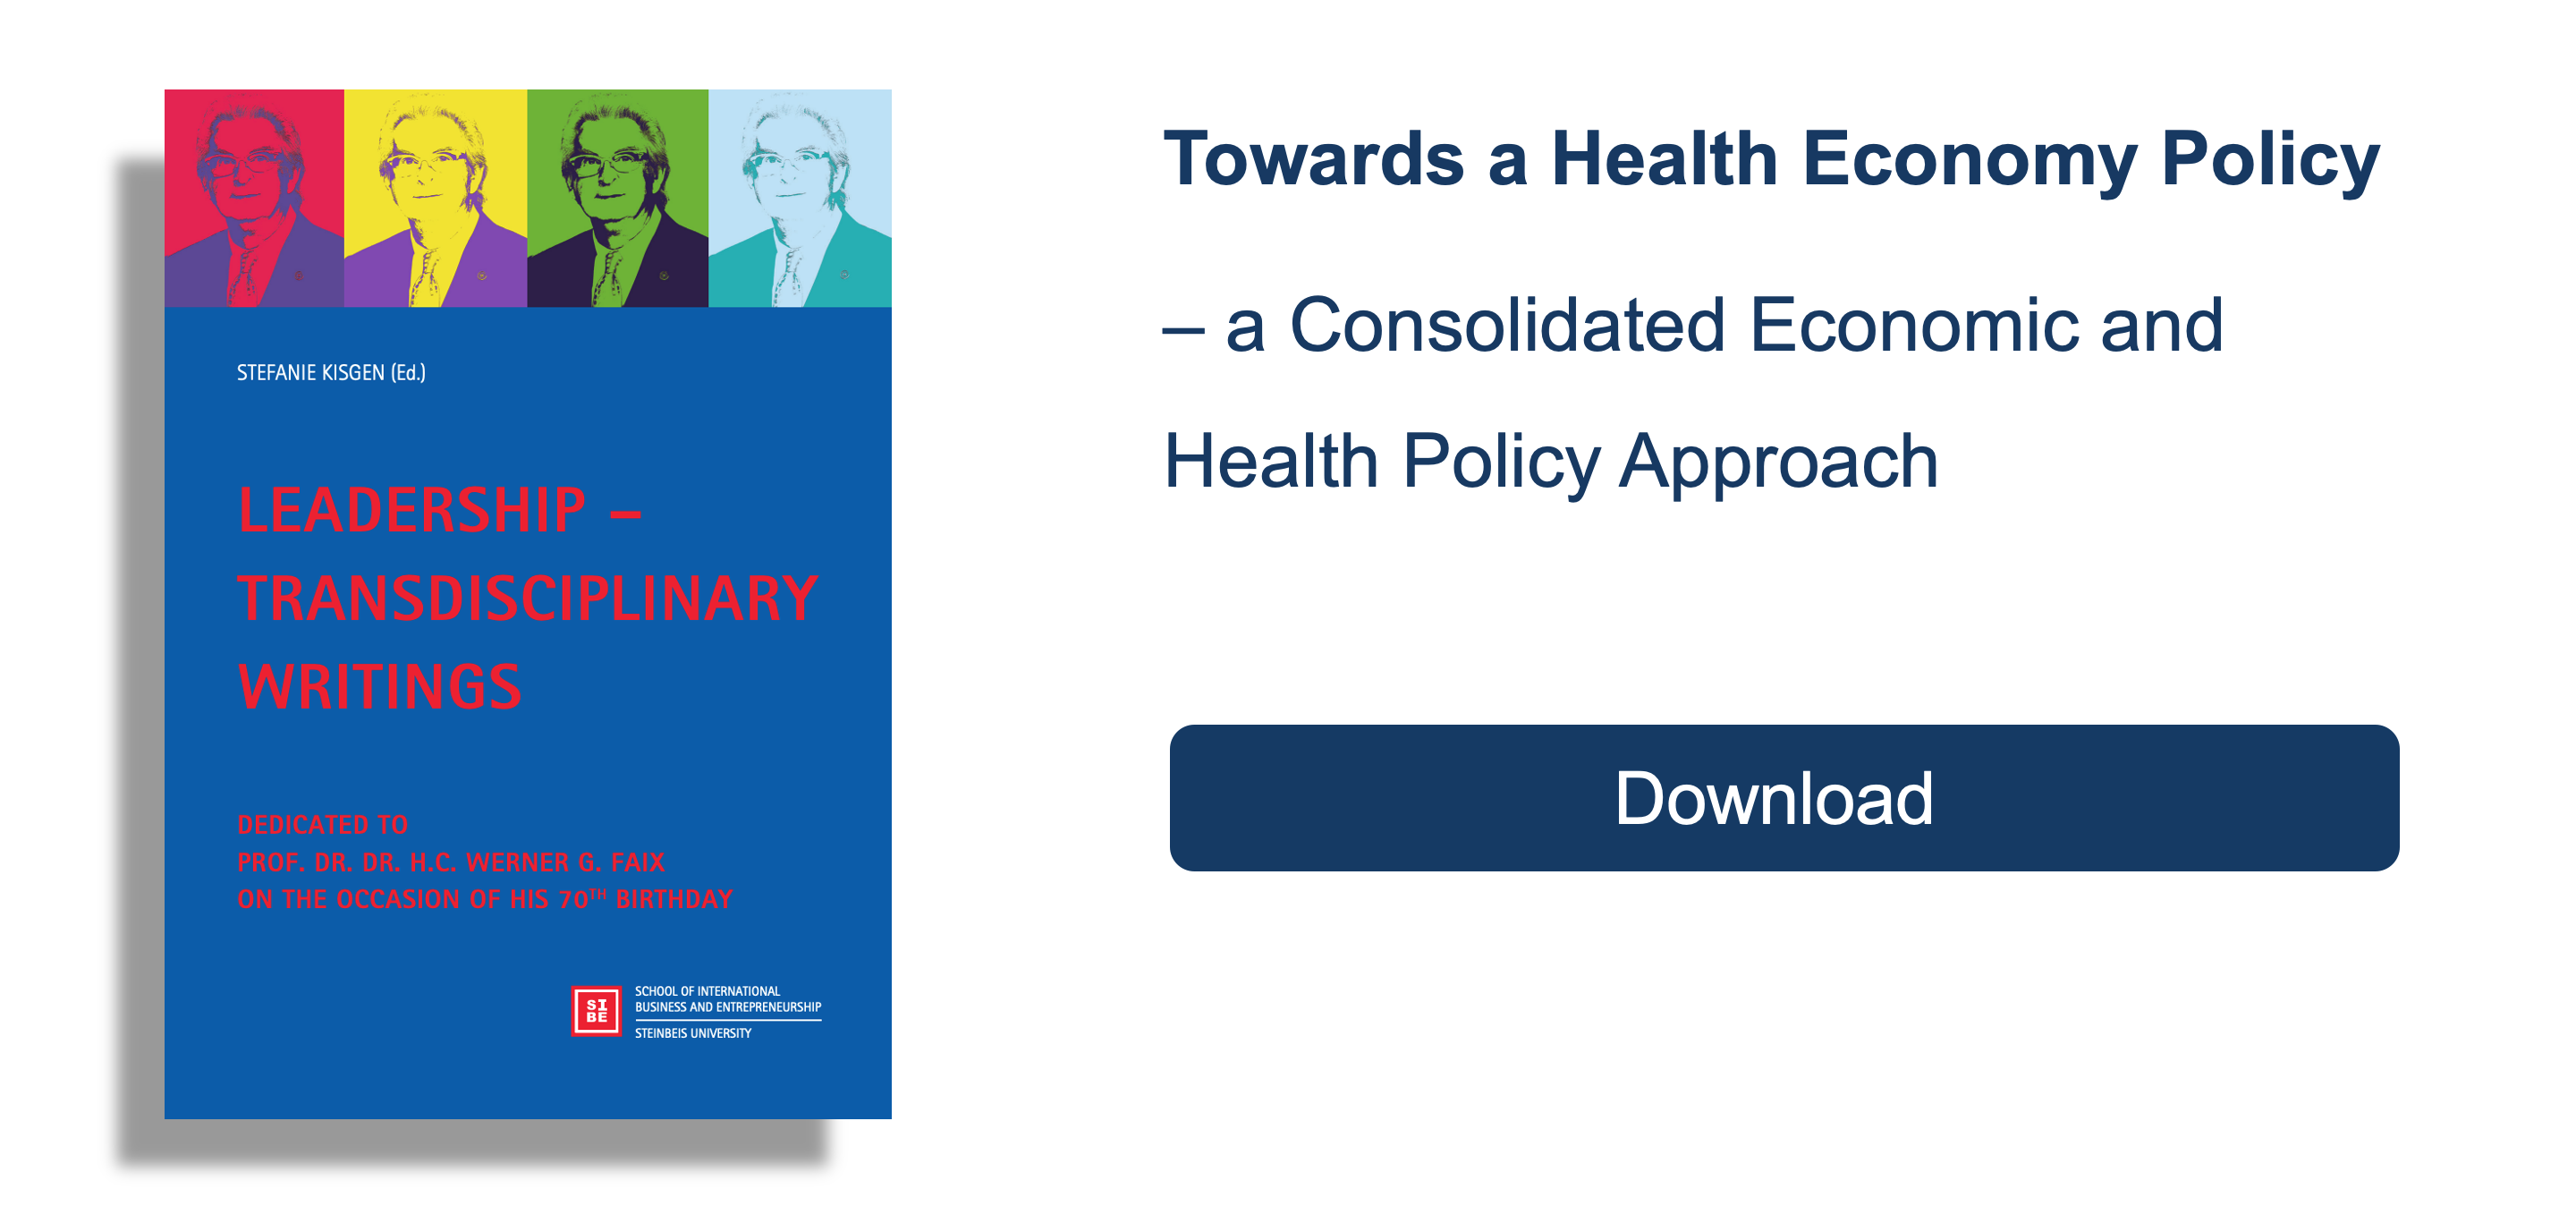 Towards a Health Economy Policy – a Consolidated Economic and Health Policy Approach